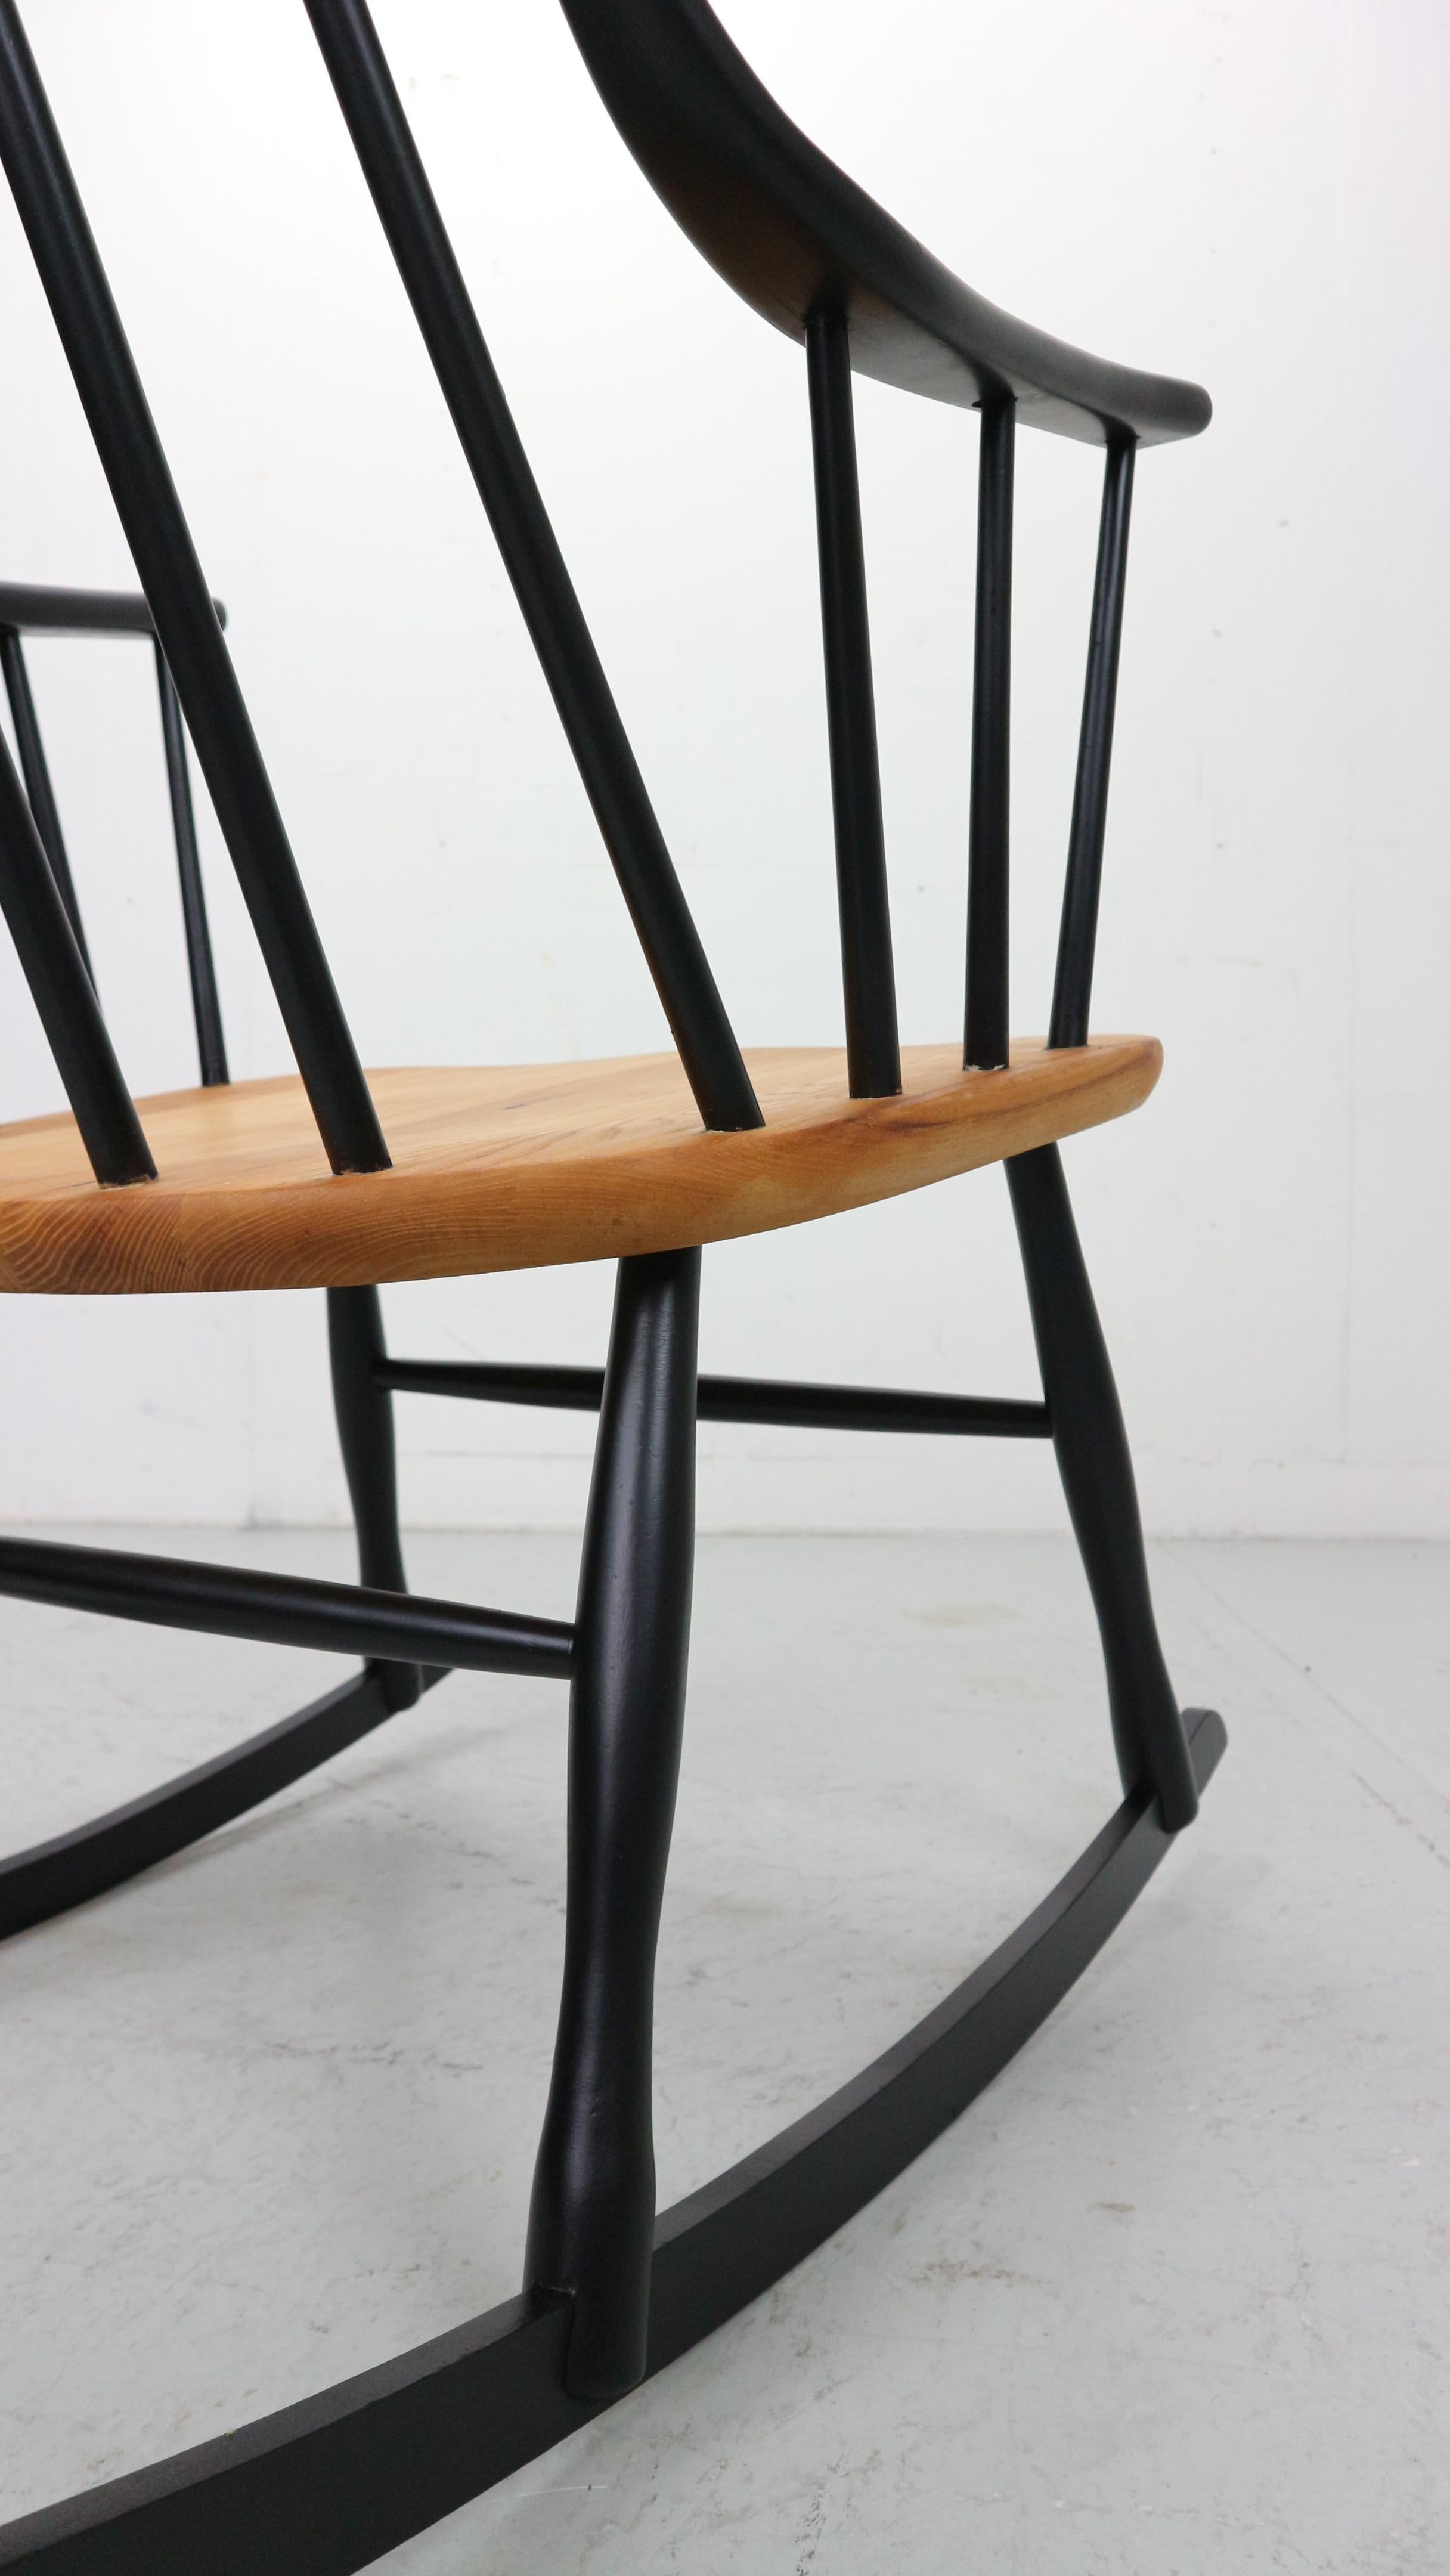 Lena Larsson, made by Nesto, a mid century rockingchair with sculptural arms 1